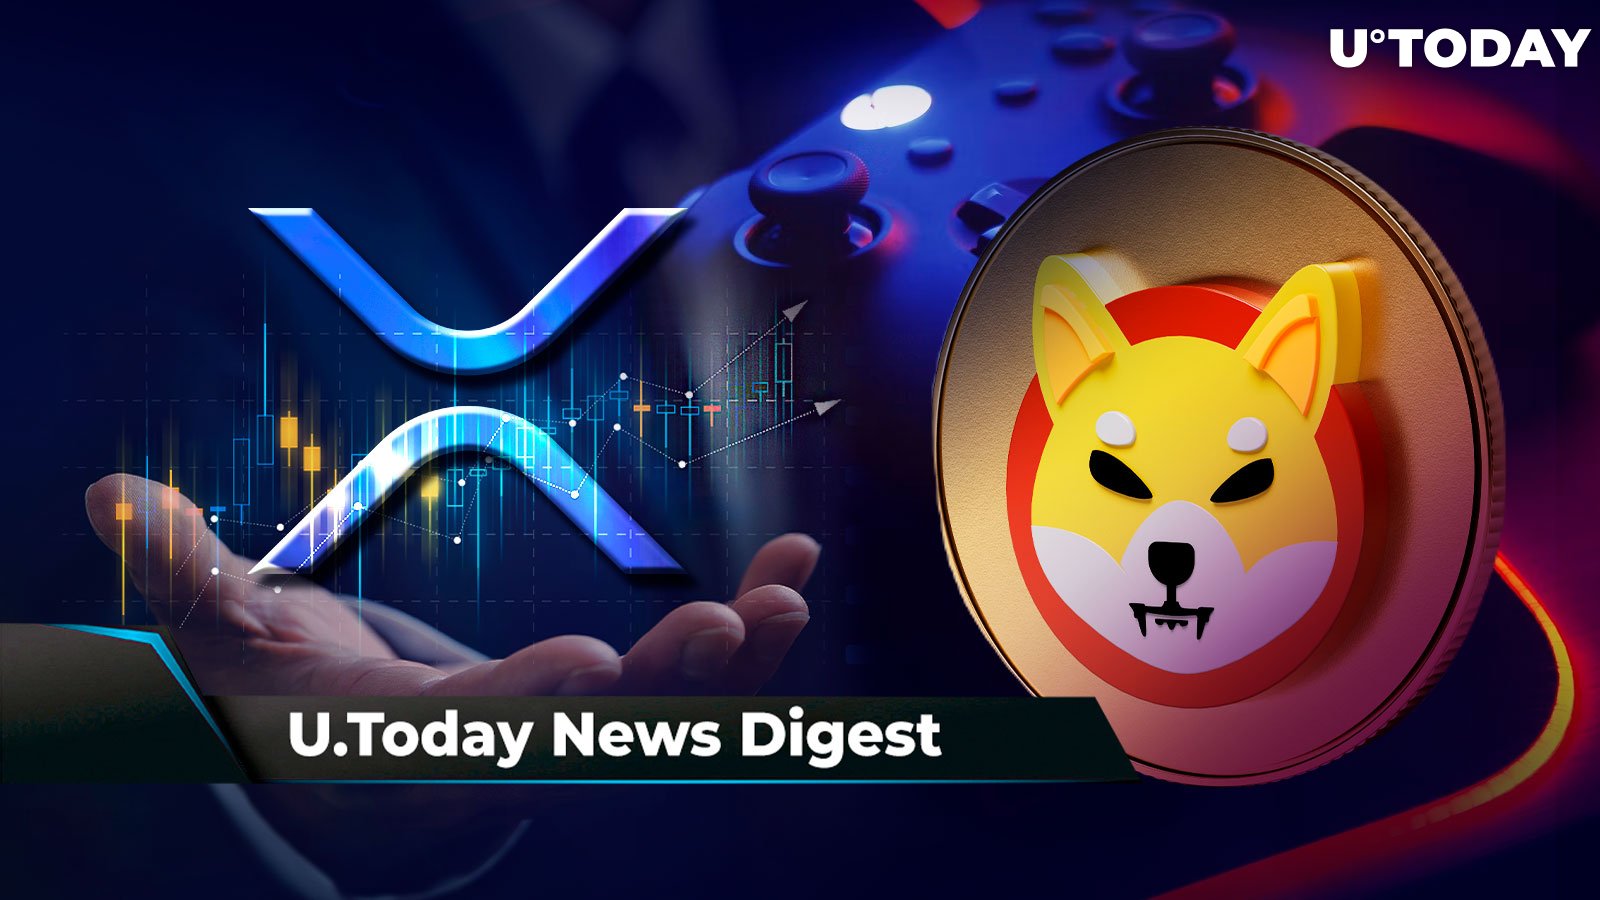 Shiba Eternity to Feature at Largest Gaming Event, XRP Has One of Best Looking Charts, Cardano Tops PayPal and Netflix with Low Energy Use: Crypto News Digest by U.Today